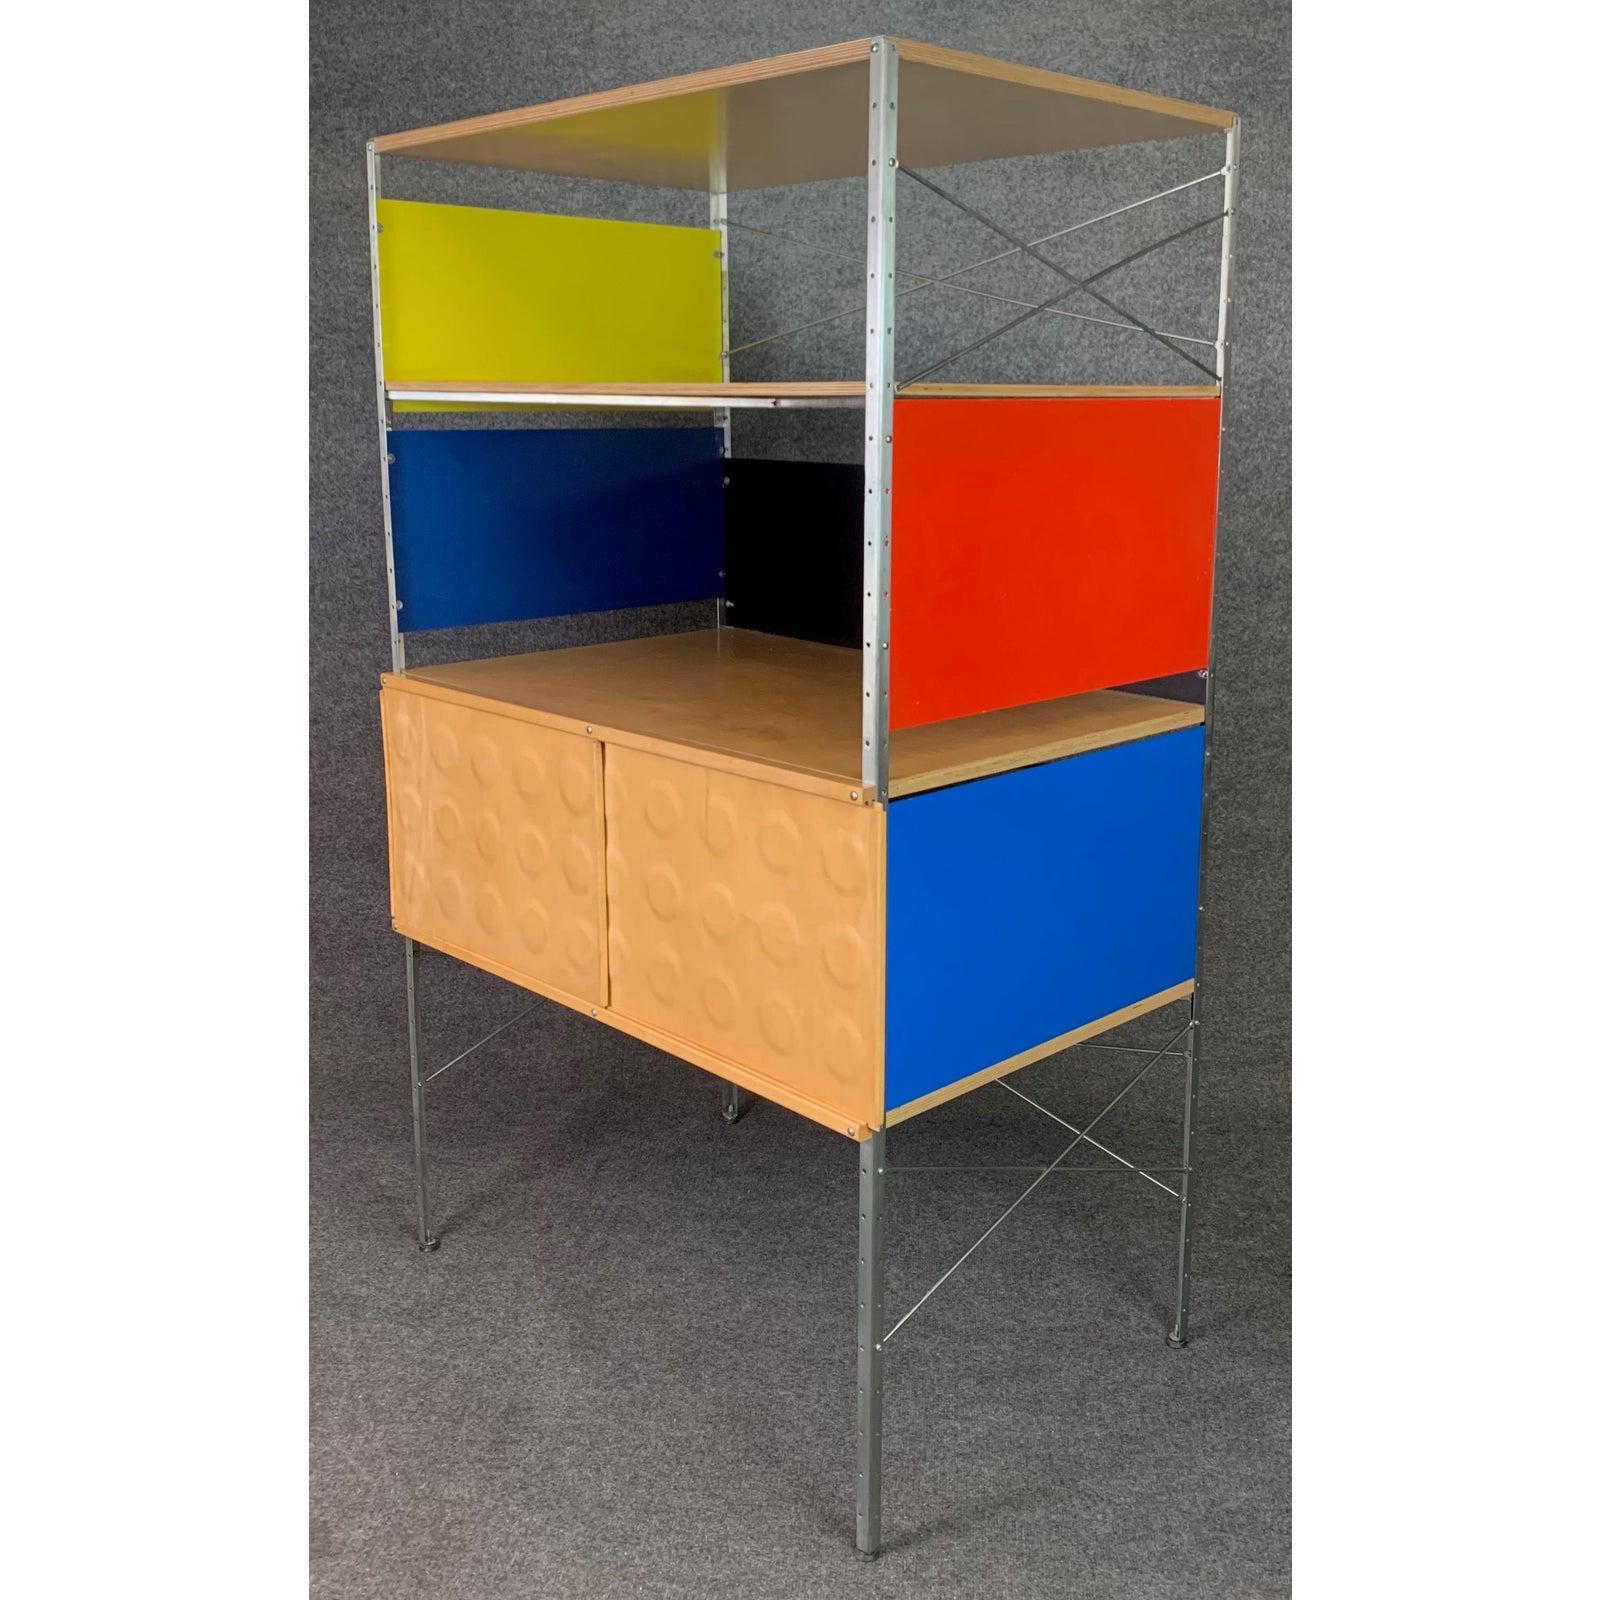 Here is a beautiful custom storage system inspired by the ESU units of Charles Eames manufactured by Modernica in the USA in the early 2000s.
This colorful piece features a storage cubby behind two sliding doors and two shelving spaces.
Very good